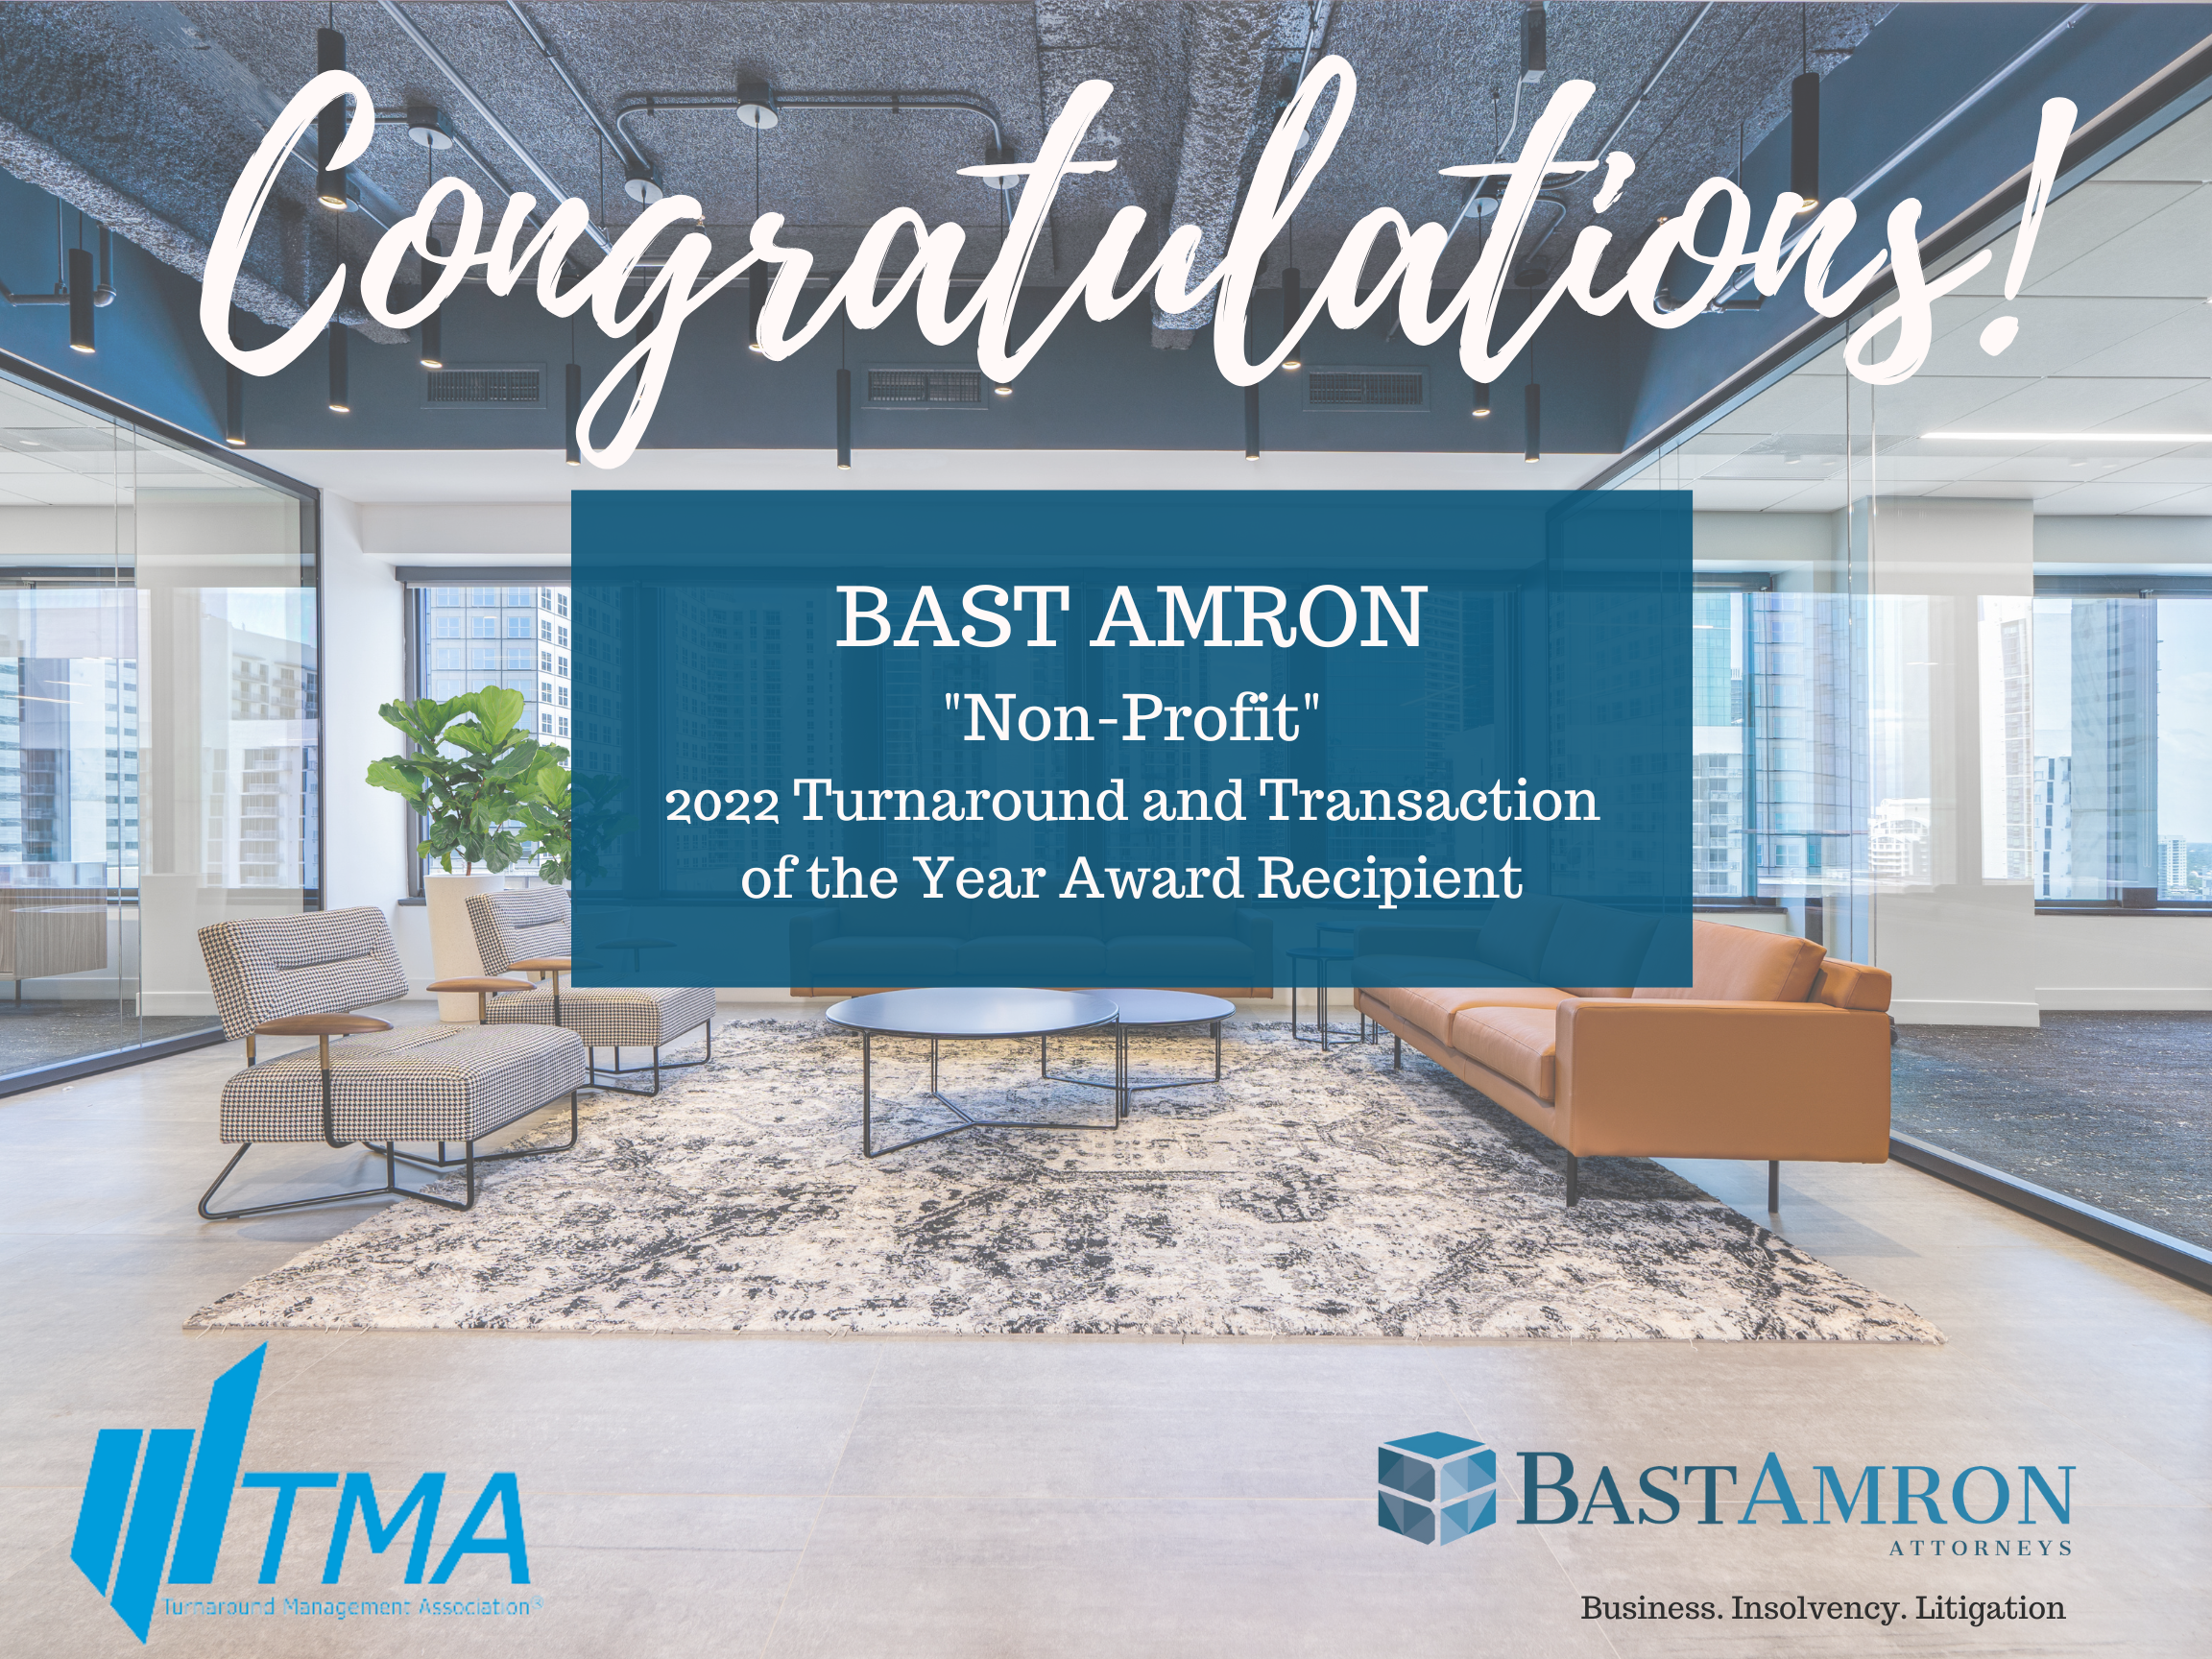 BAST AMRON RECEIVES 2022 TURNAROUND AND TRANSACTION OF THE YEAR AWARD